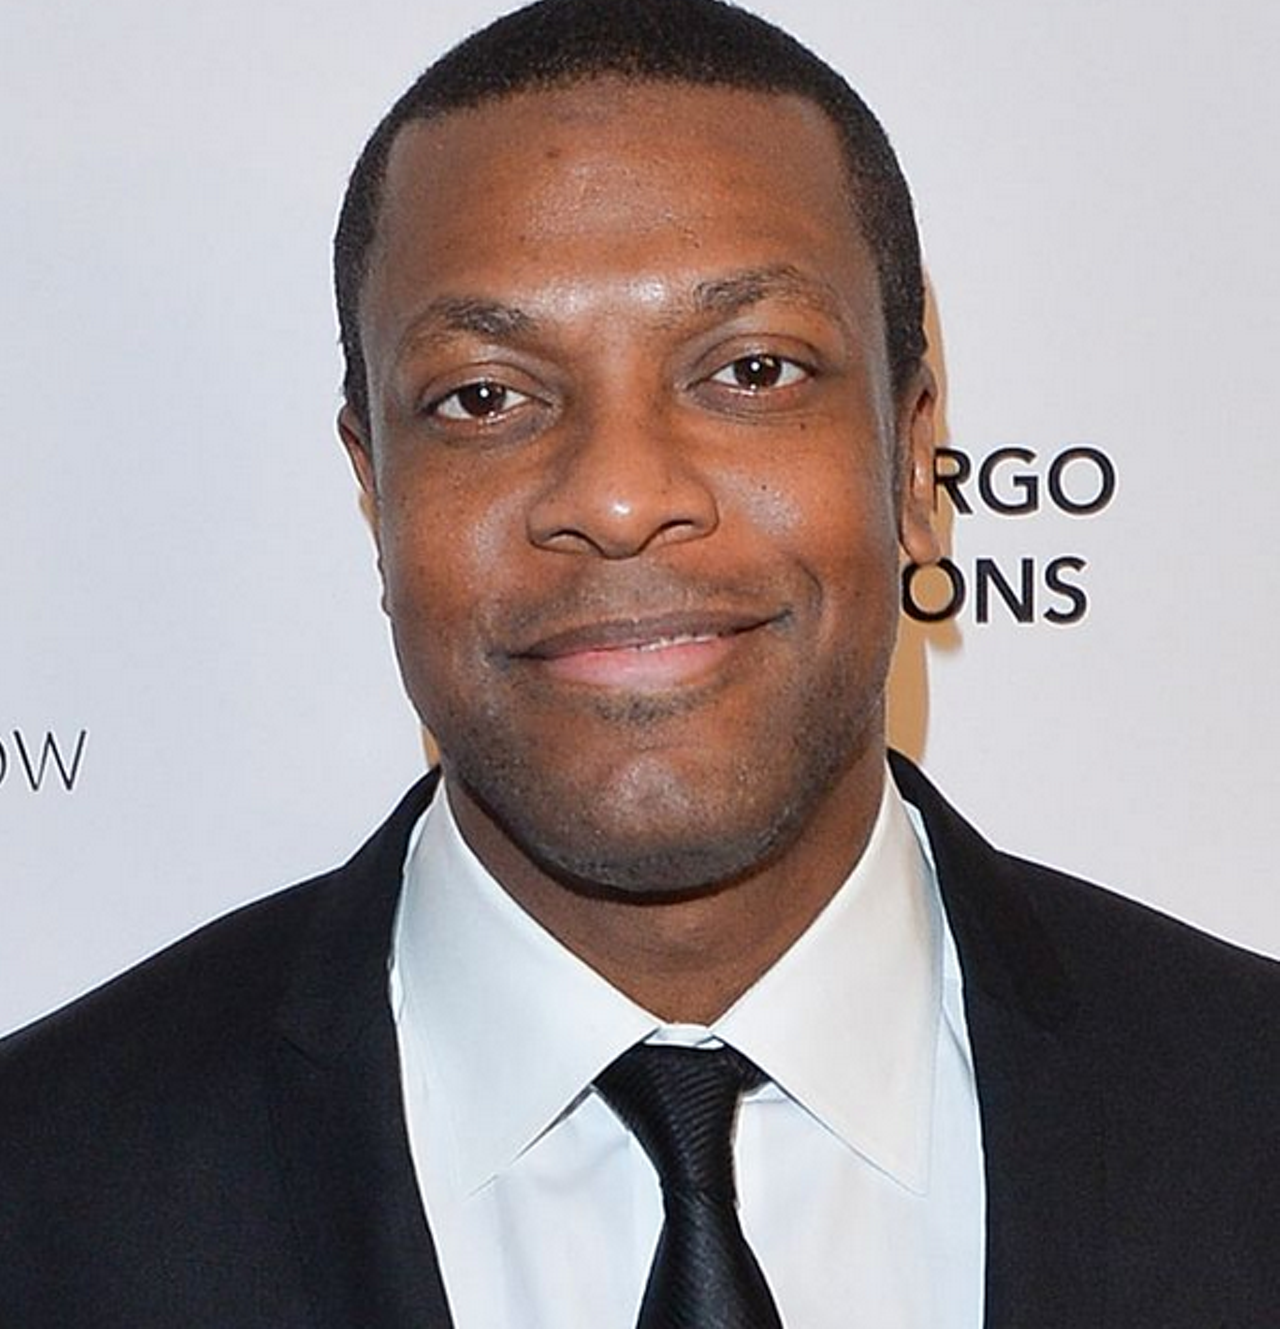 Comedian and actor Chris Tucker has had some major roles in some major comedies. In 1995, he teamed up with Ice Cube for Friday and in 1998 he and martial arts expert Jackie Chan starred in Rush Hour, a film that would yield several sequels. His acting career has stalled a bit (though he did have a role in 2012’s Silver Linings Playbook, but he’s made a successful return to standup comedy and comes to town tonight at 7:30 for a performance at Playhouse Square’s Connor Palace. While too many of his jokes rely on “motherfucker this” and “motherfucker that,” he has good comic timing and a swift delivery. Tickets are $49.50 to $59.50. (Niesel)